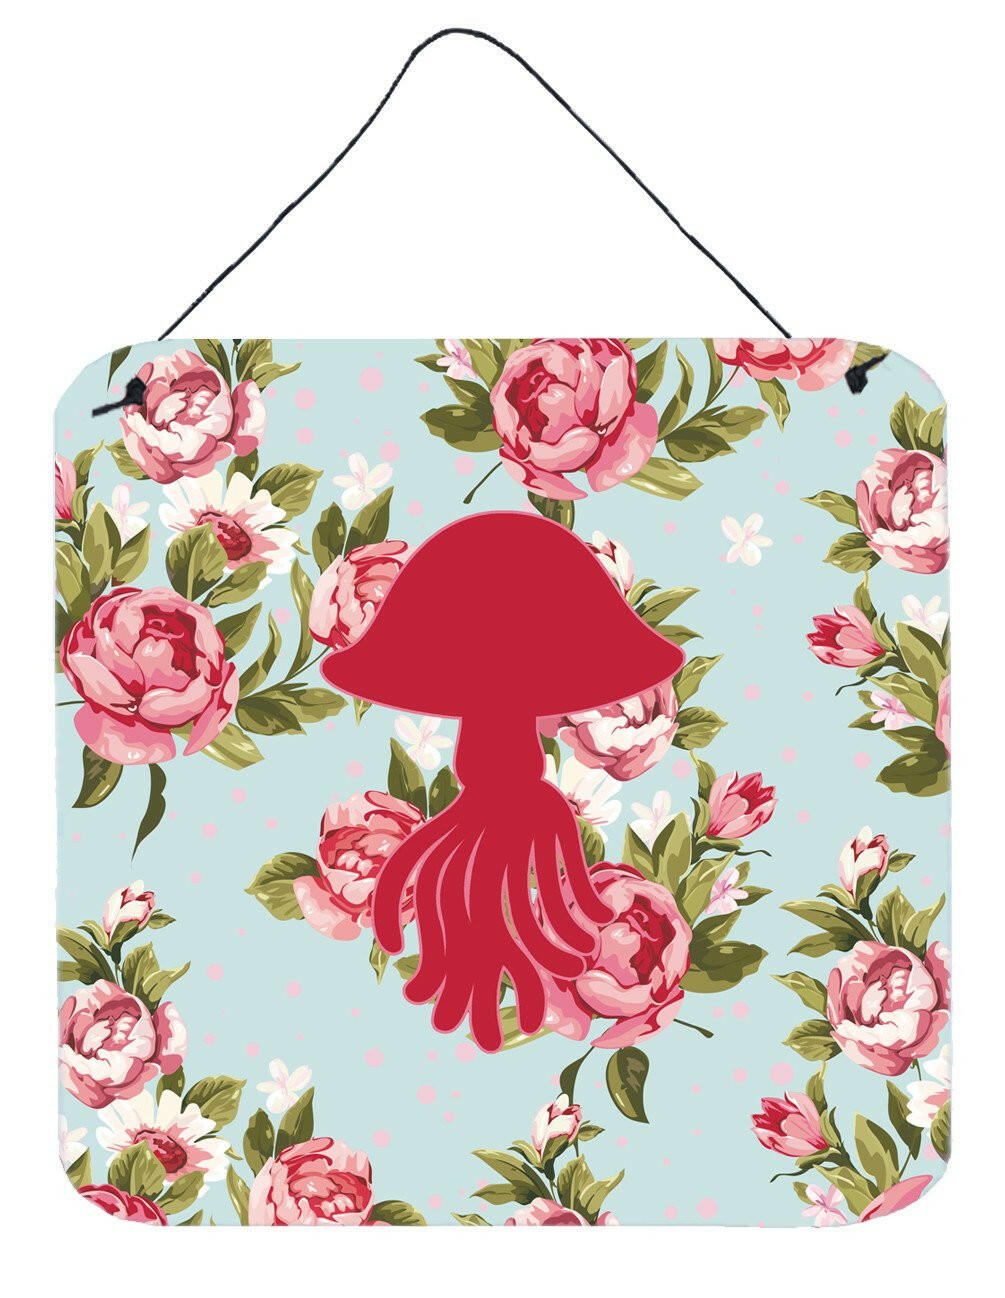 Jellyfish Shabby Chic Blue Roses Wall or Door Hanging Prints BB1089 by Caroline&#39;s Treasures